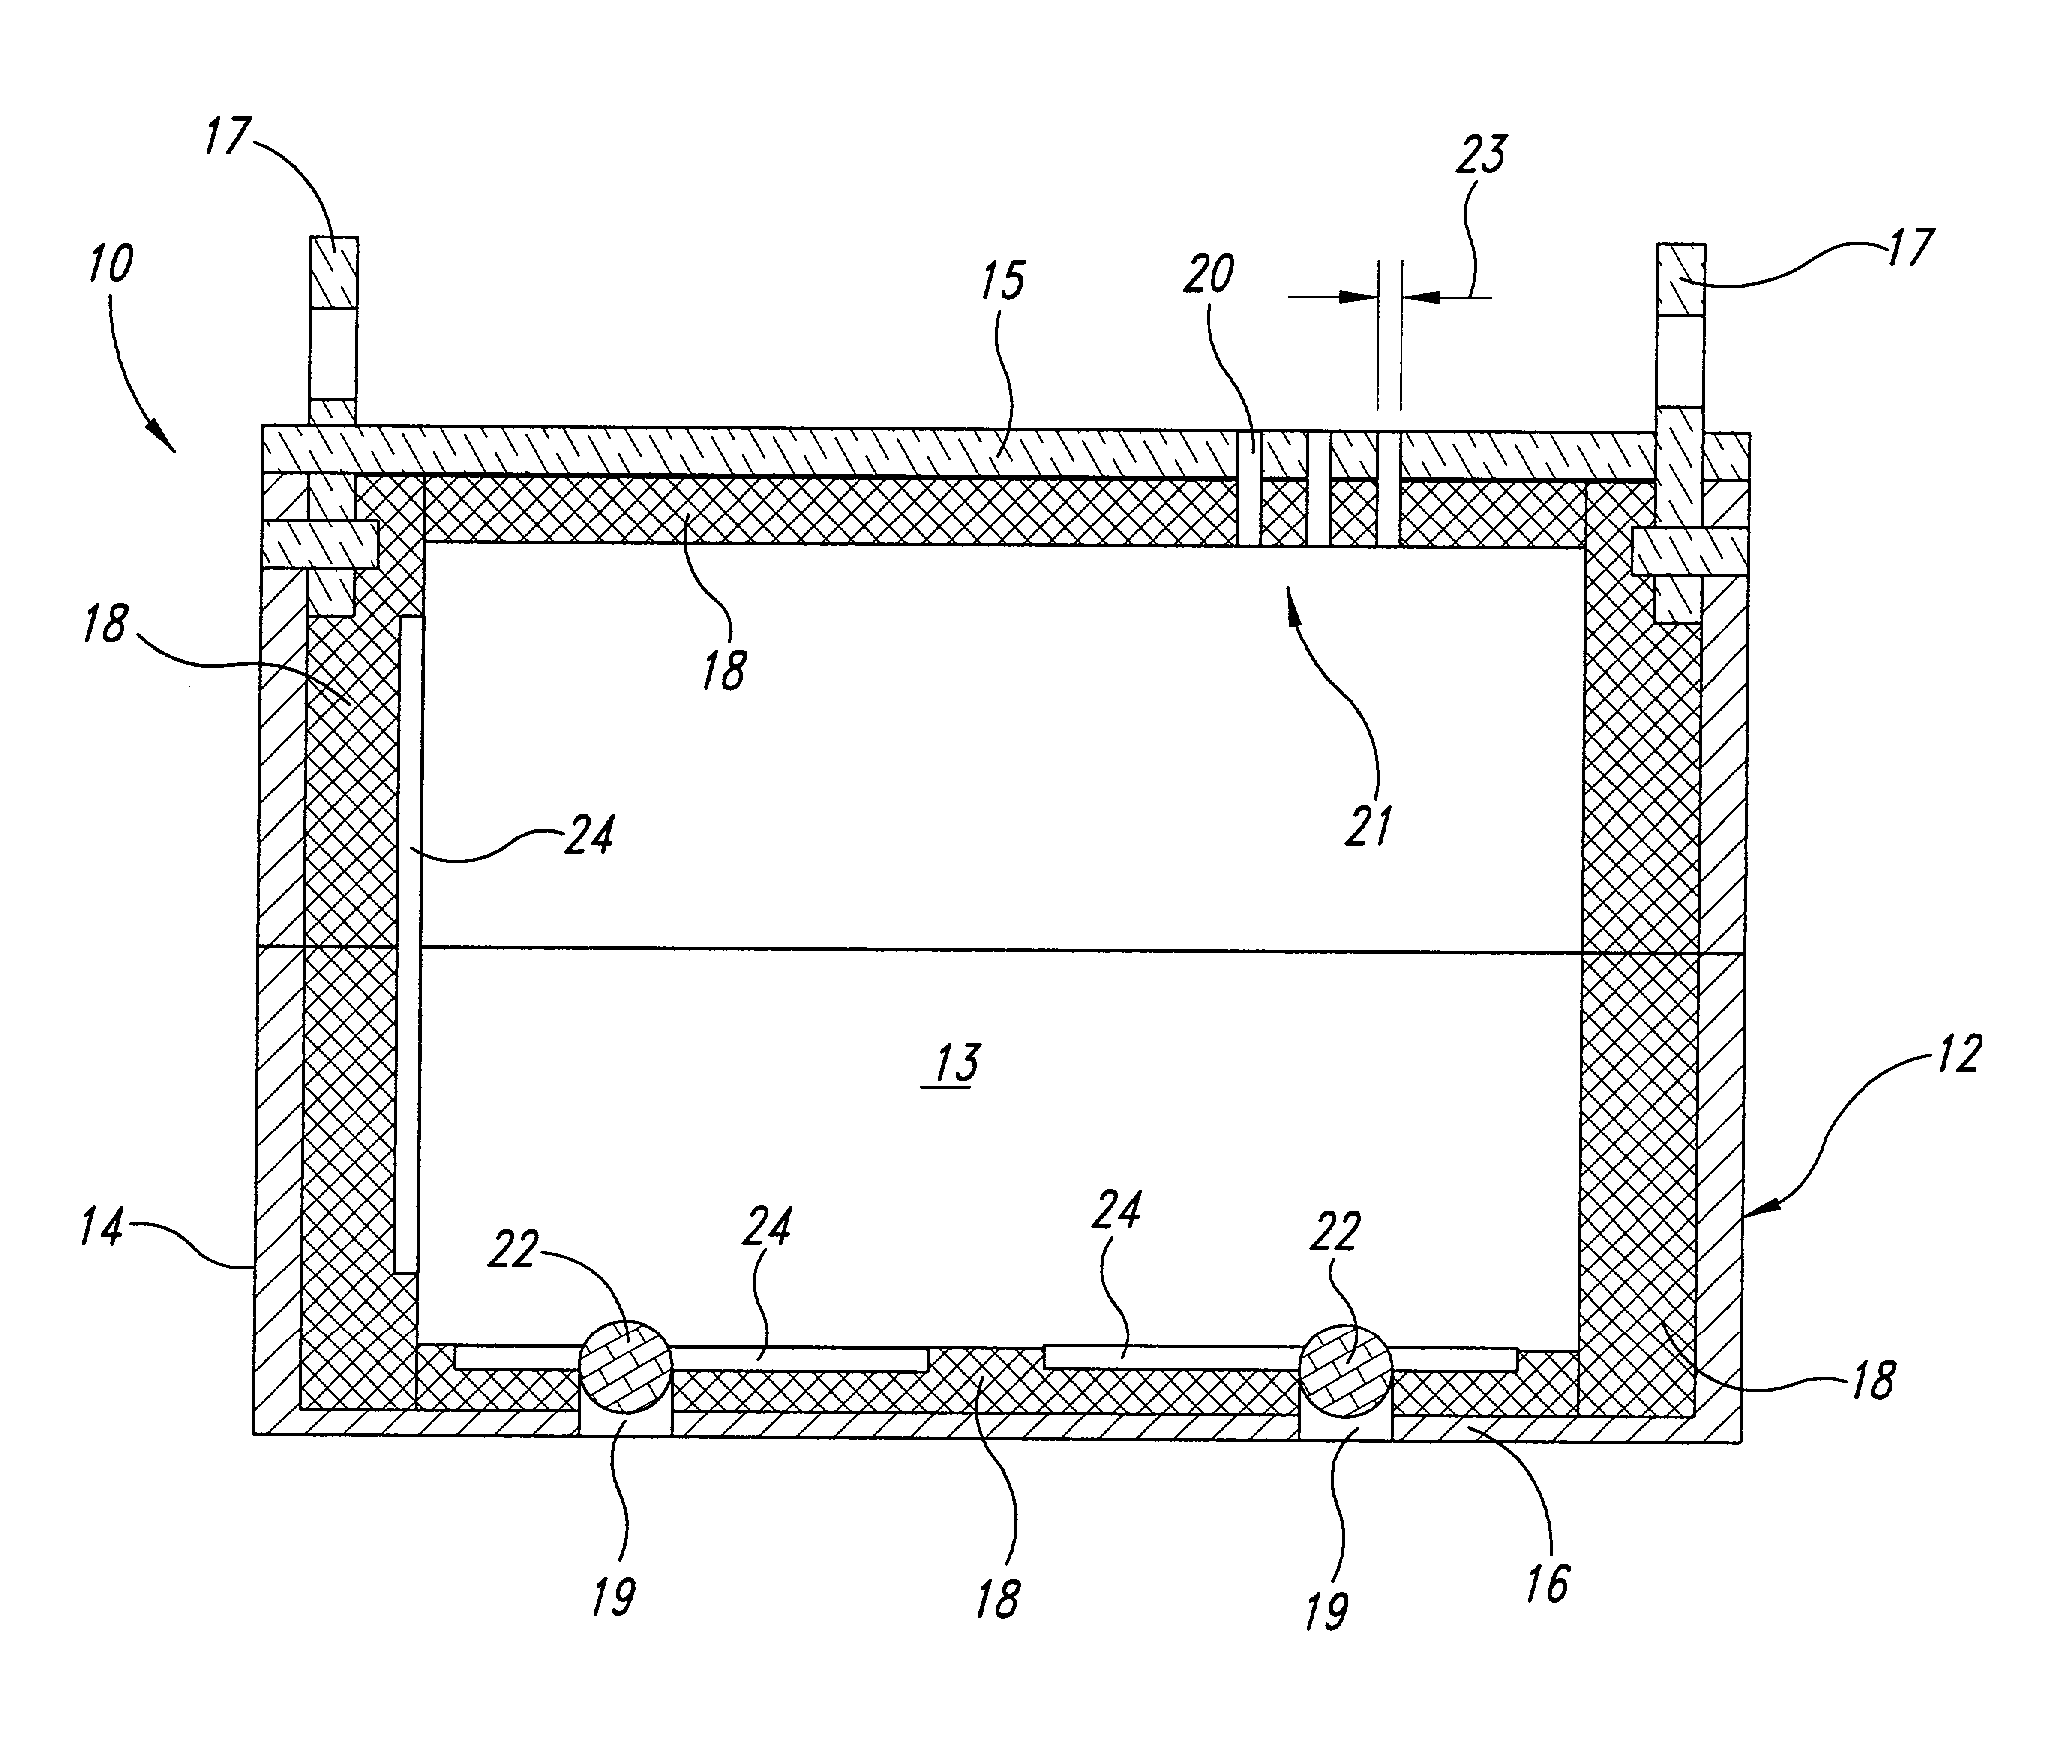 Method for high pressure treatment of substances under controlled temperature conditions